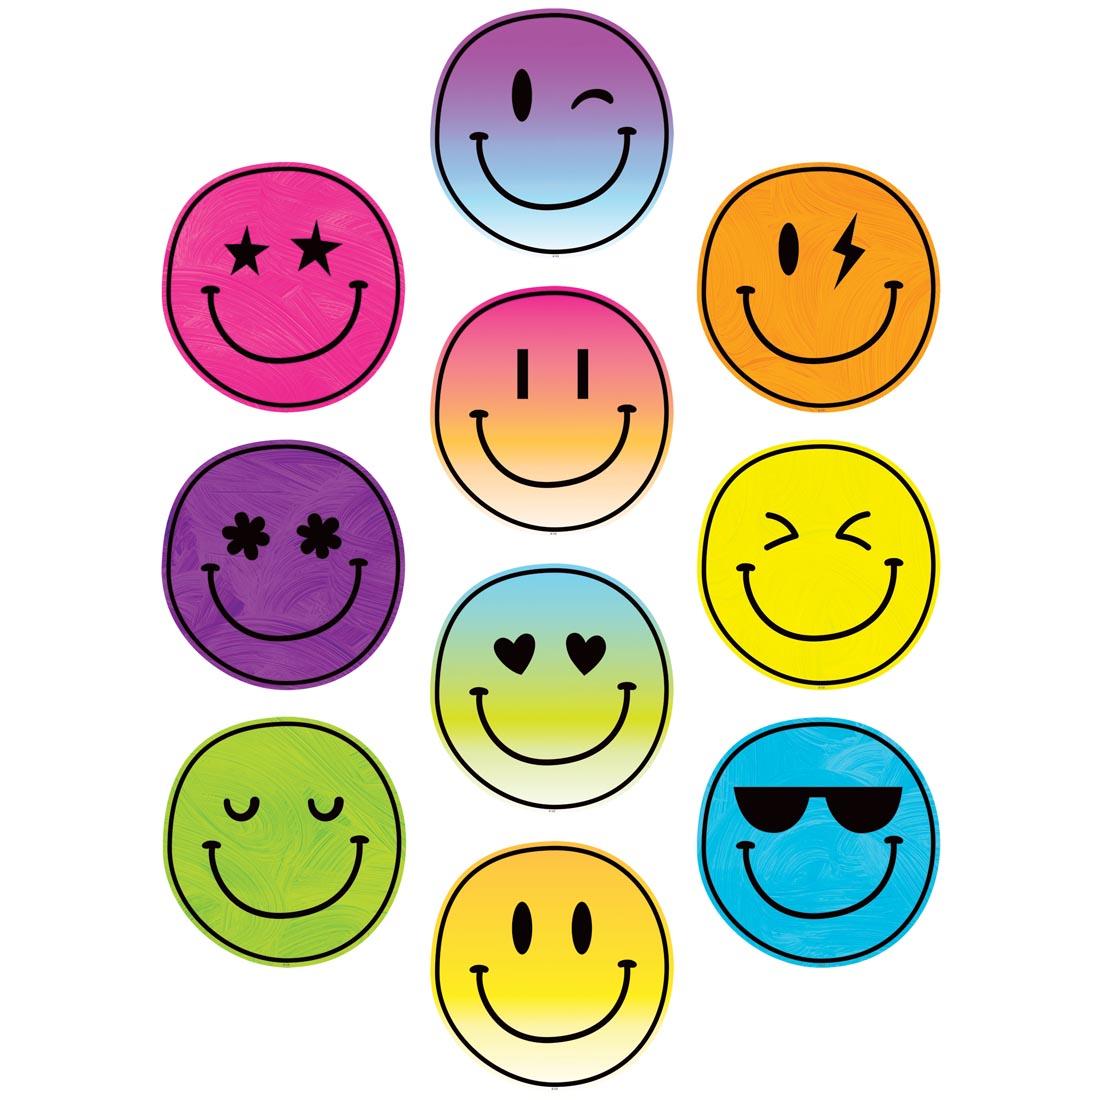 Smiley Faces Accents from the Brights 4Ever collection by Teacher Created Resources